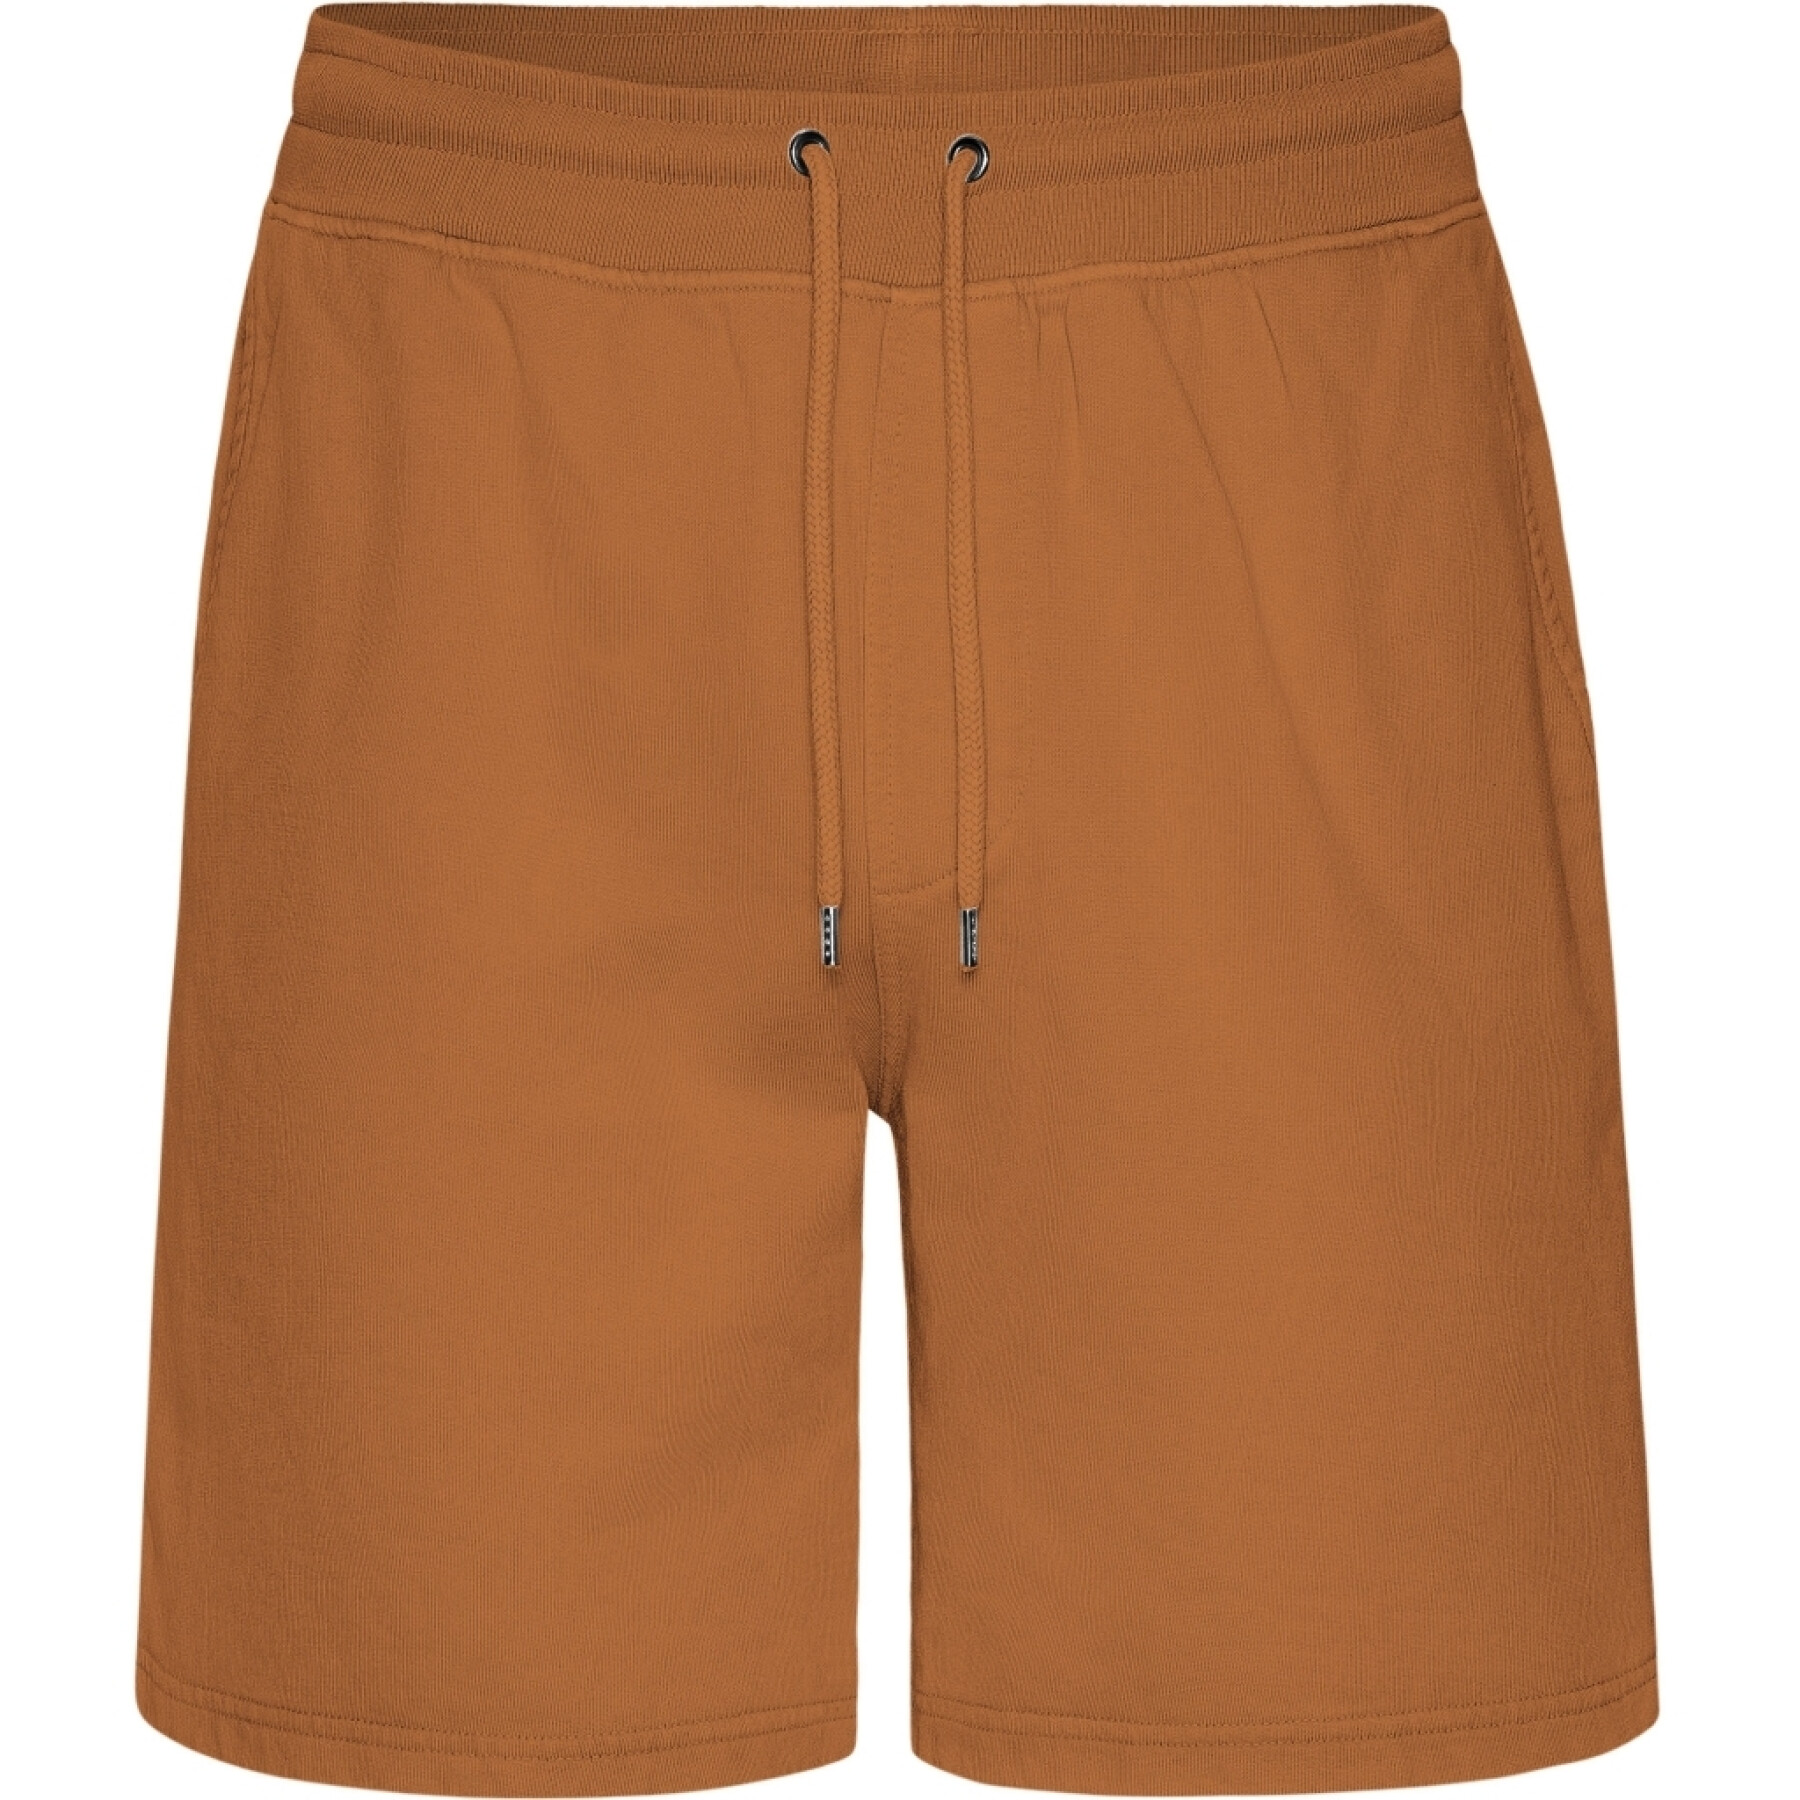 Shorts Colorful Standard Classic Organic Ginger Brown